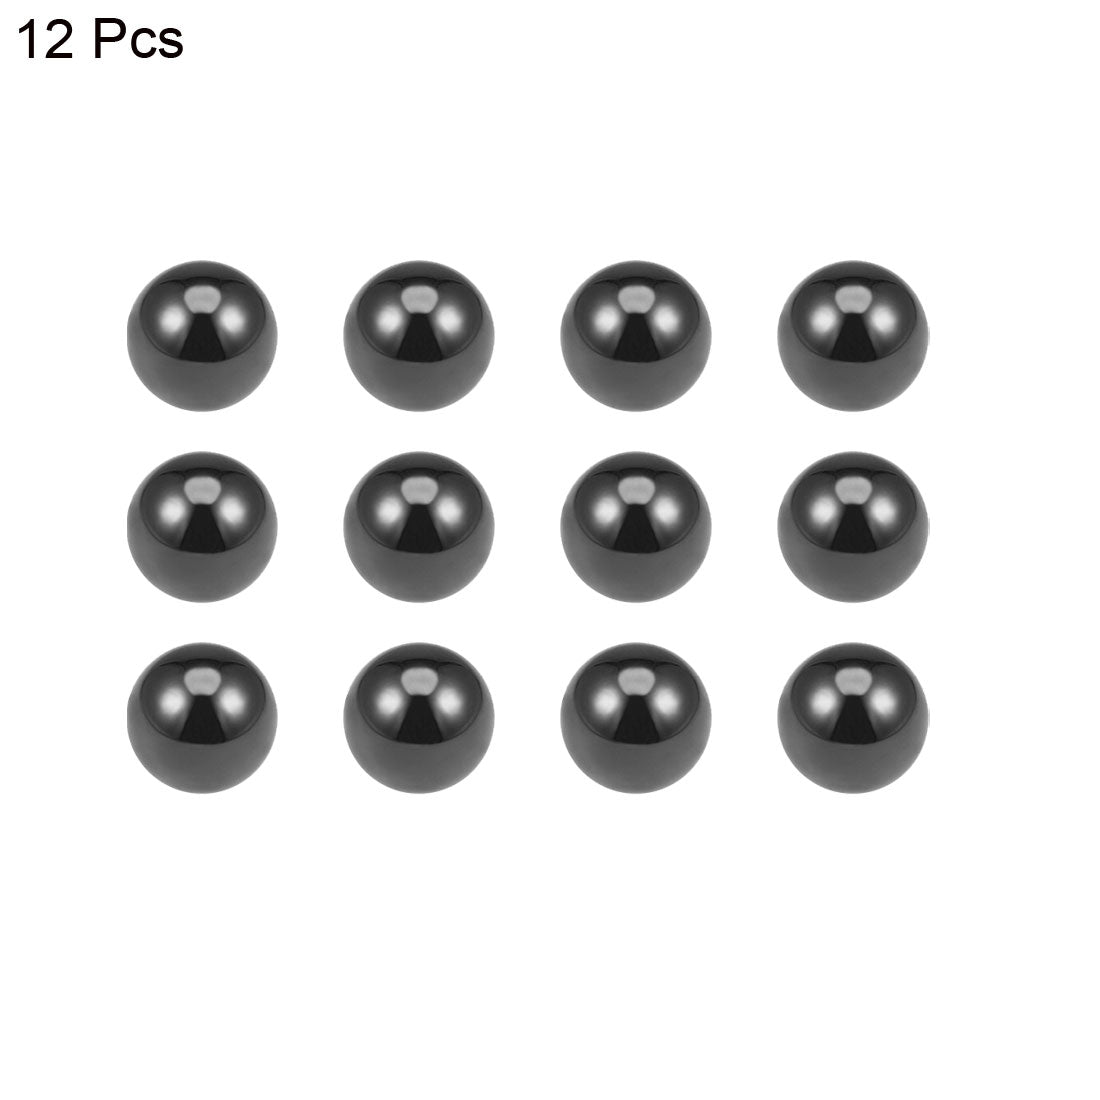 Uxcell Uxcell 3/32" Ceramic Bearing Balls, Si3N4 Silicon Nitride Ball G5 Precision 12pcs